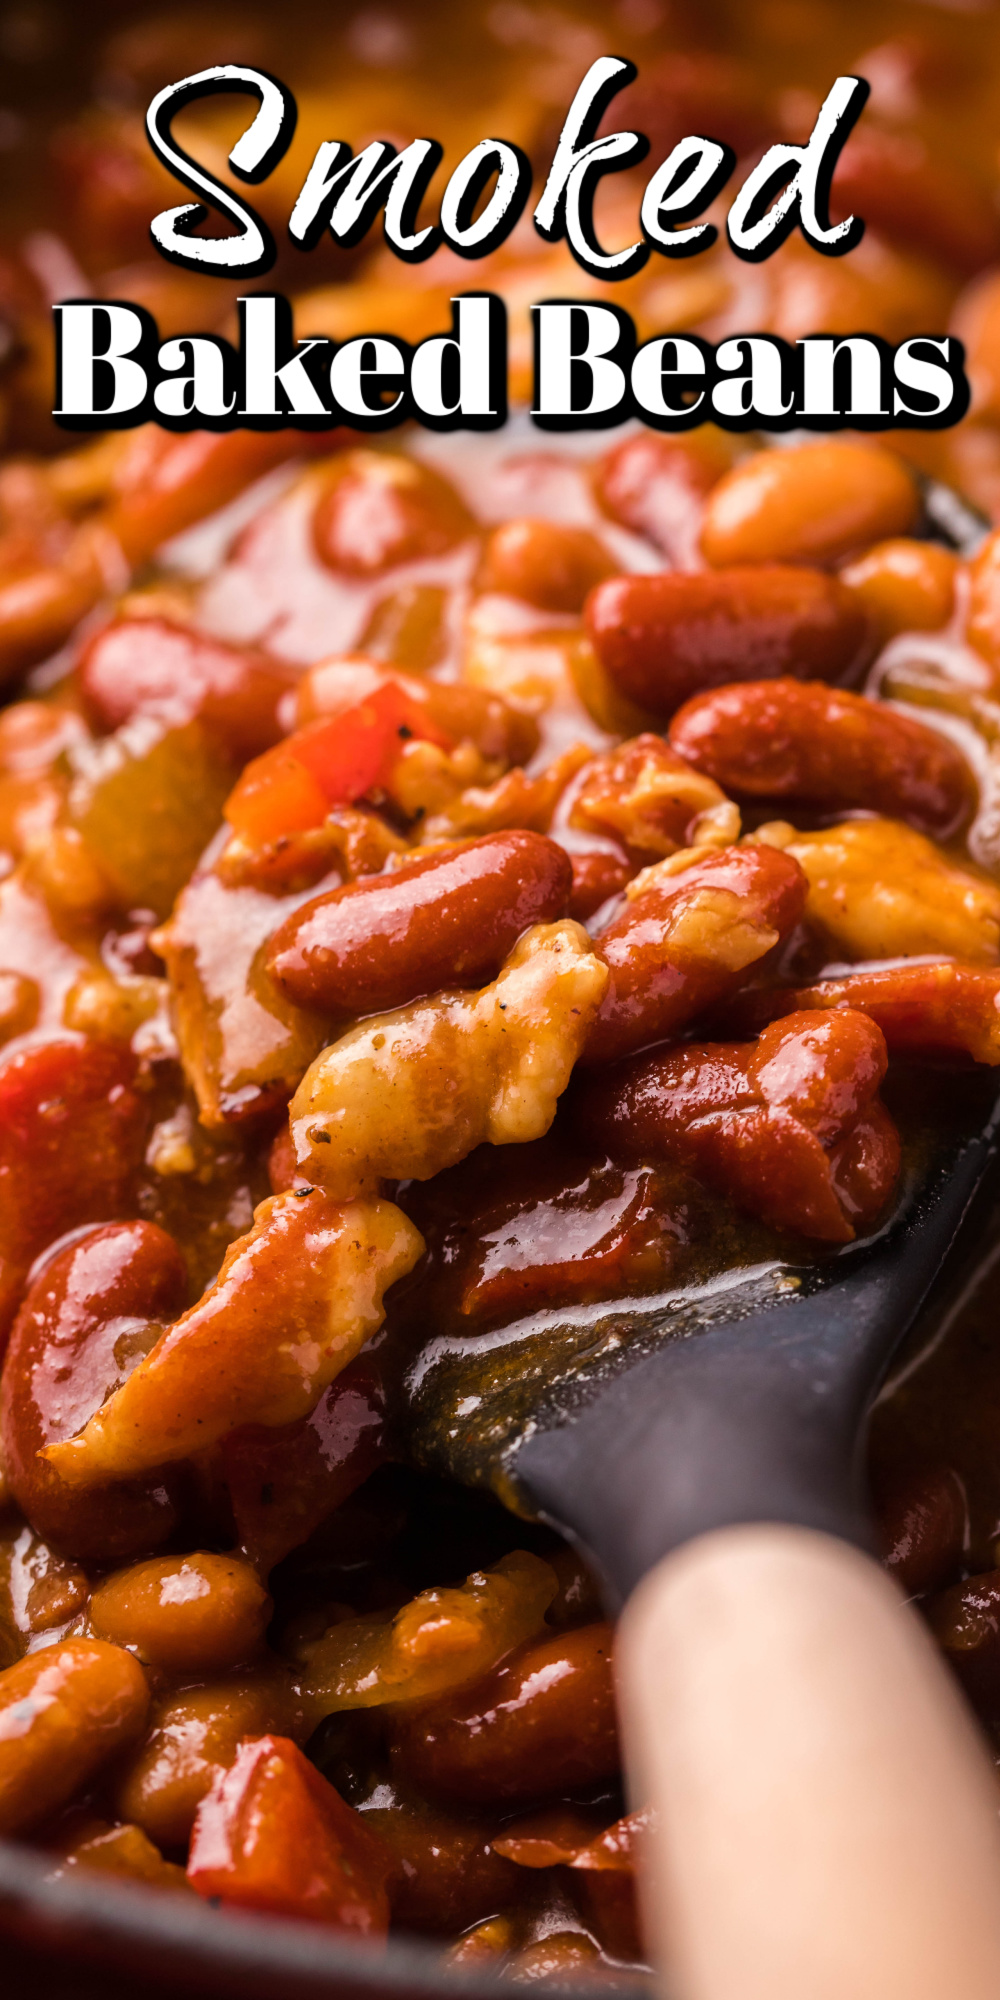 This smoked baked bean recipe is so amazingly good you are never going to want canned baked beans again!